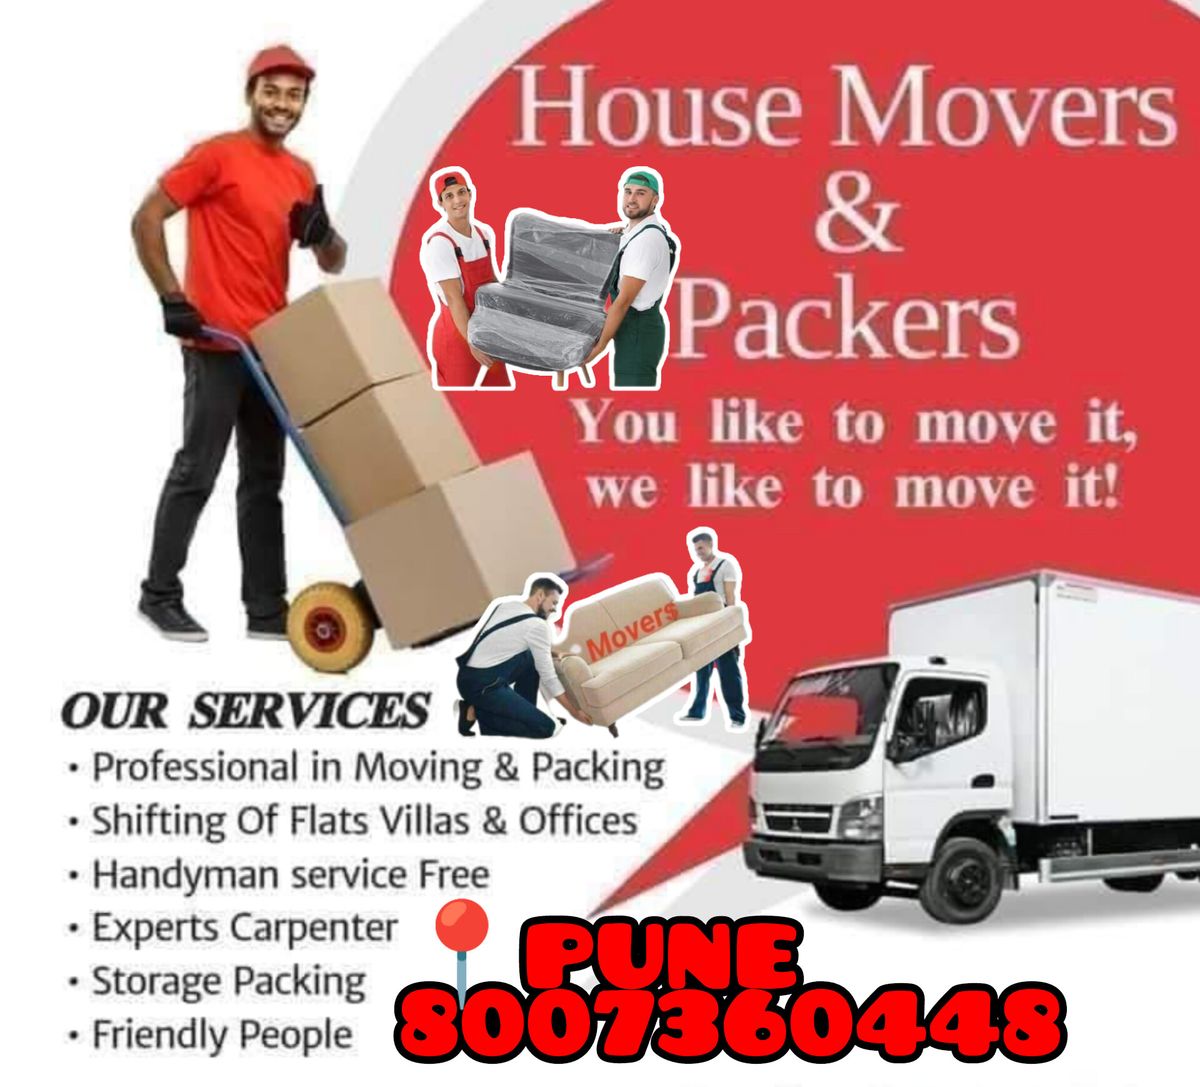 PUNE PACKERS & MOVERS